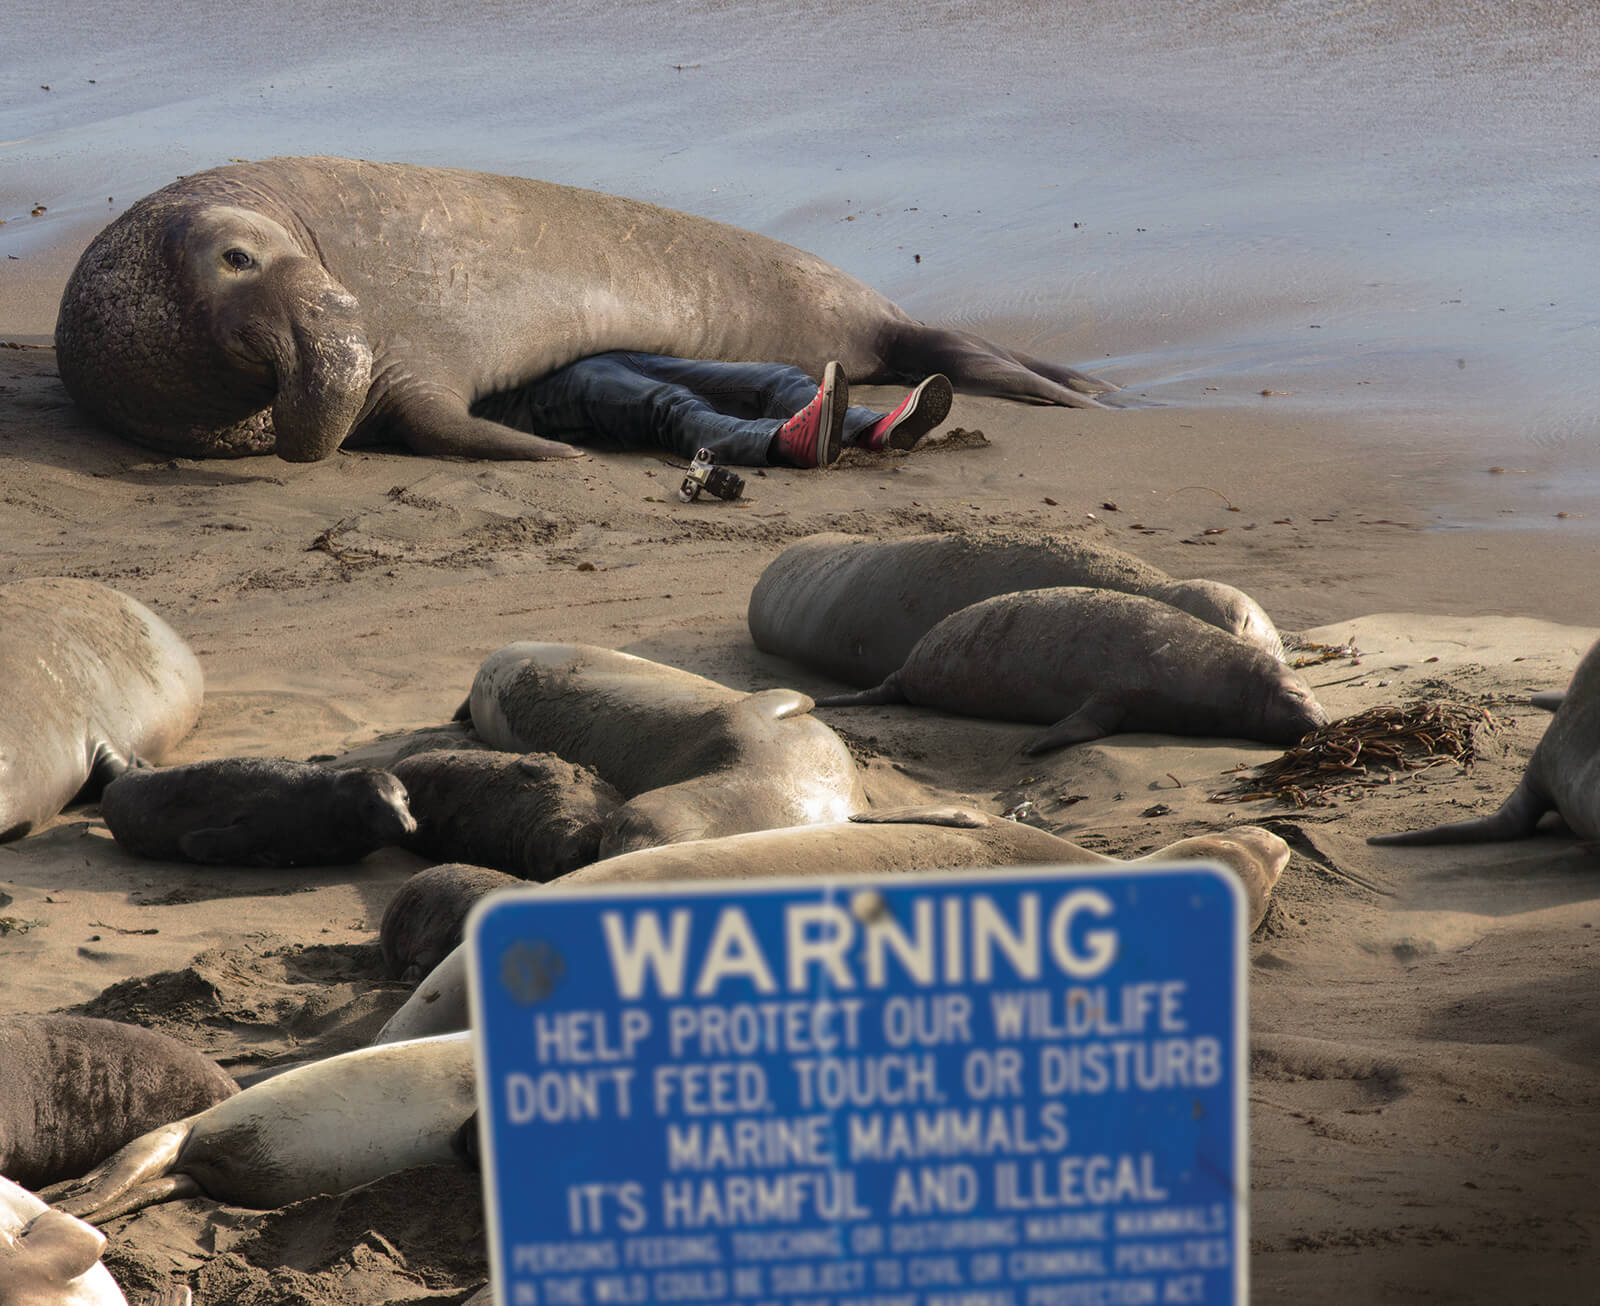 An elephantseal lays on top of a man